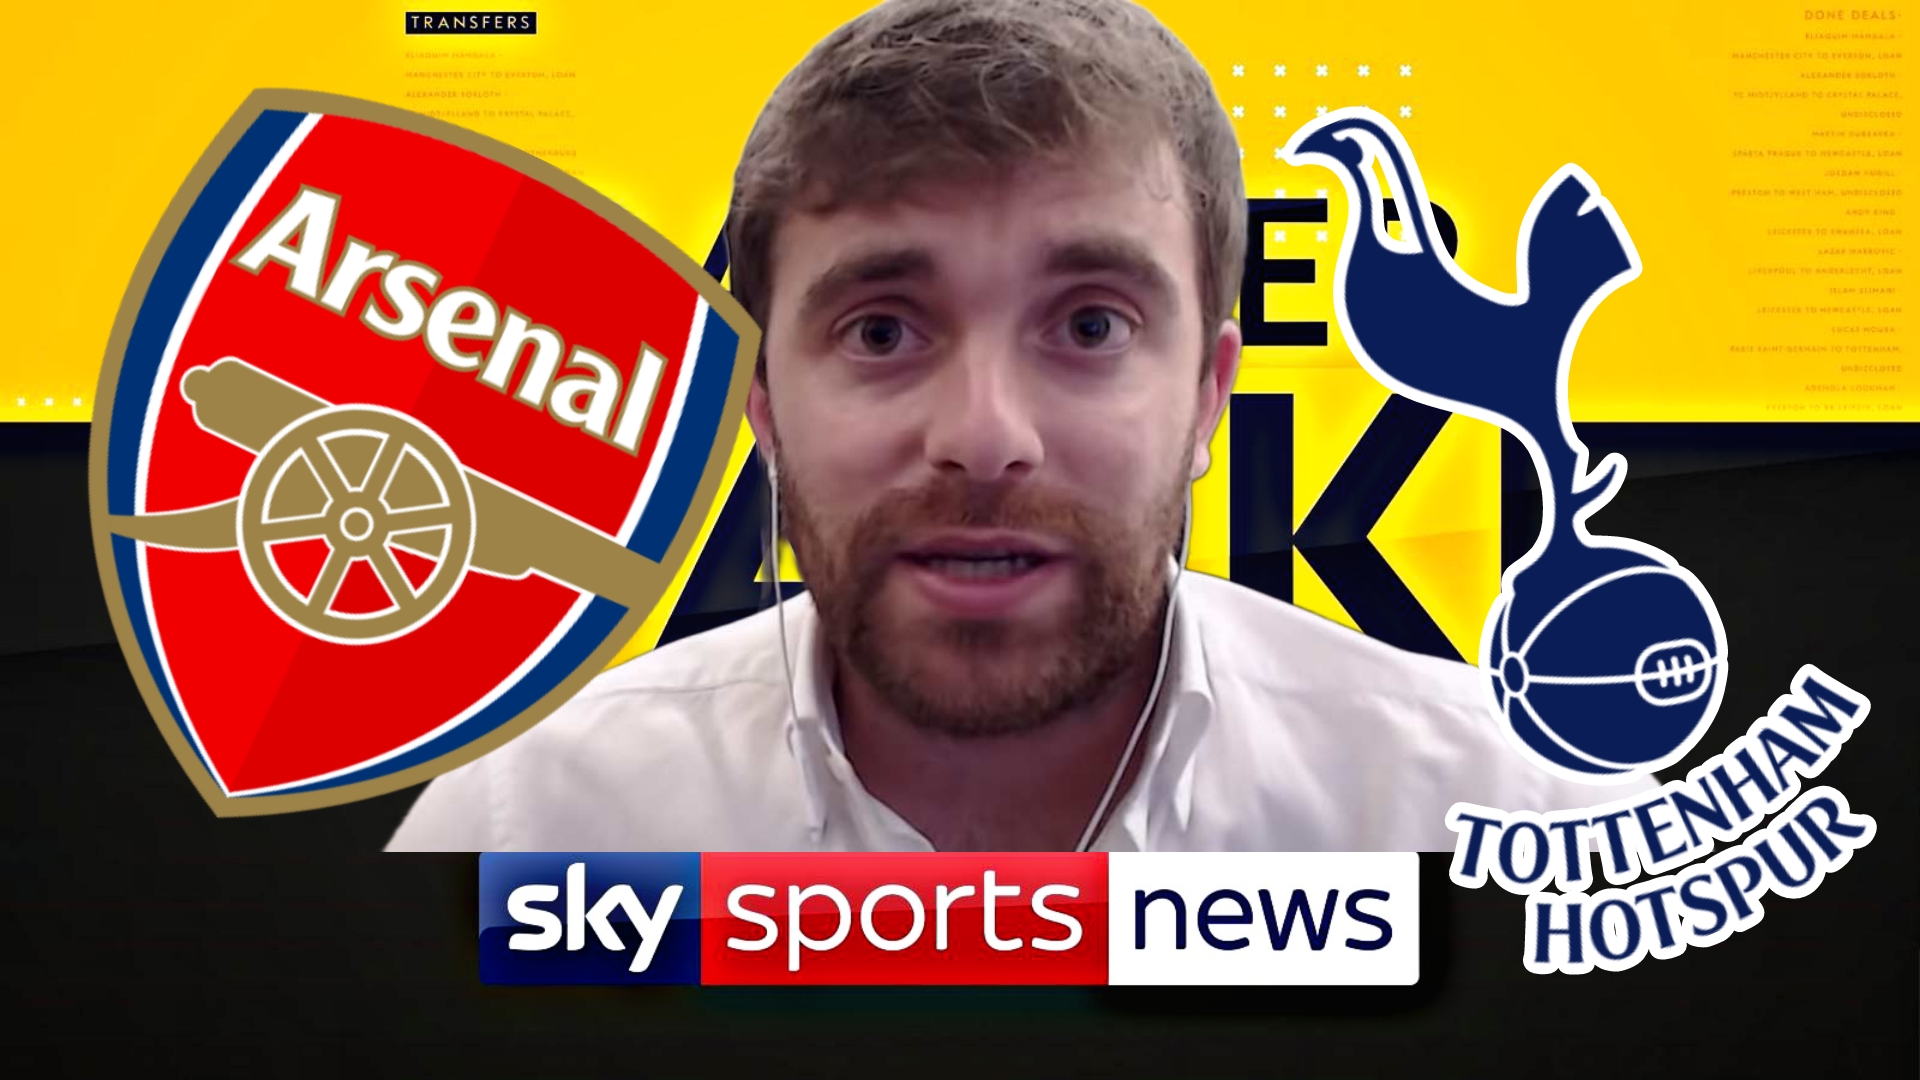 North London Battle!!! Transfer guru Fabrizio Romano claims Arsenal and Tottenham in a race to sign English star defender as North London due set for transfer battle